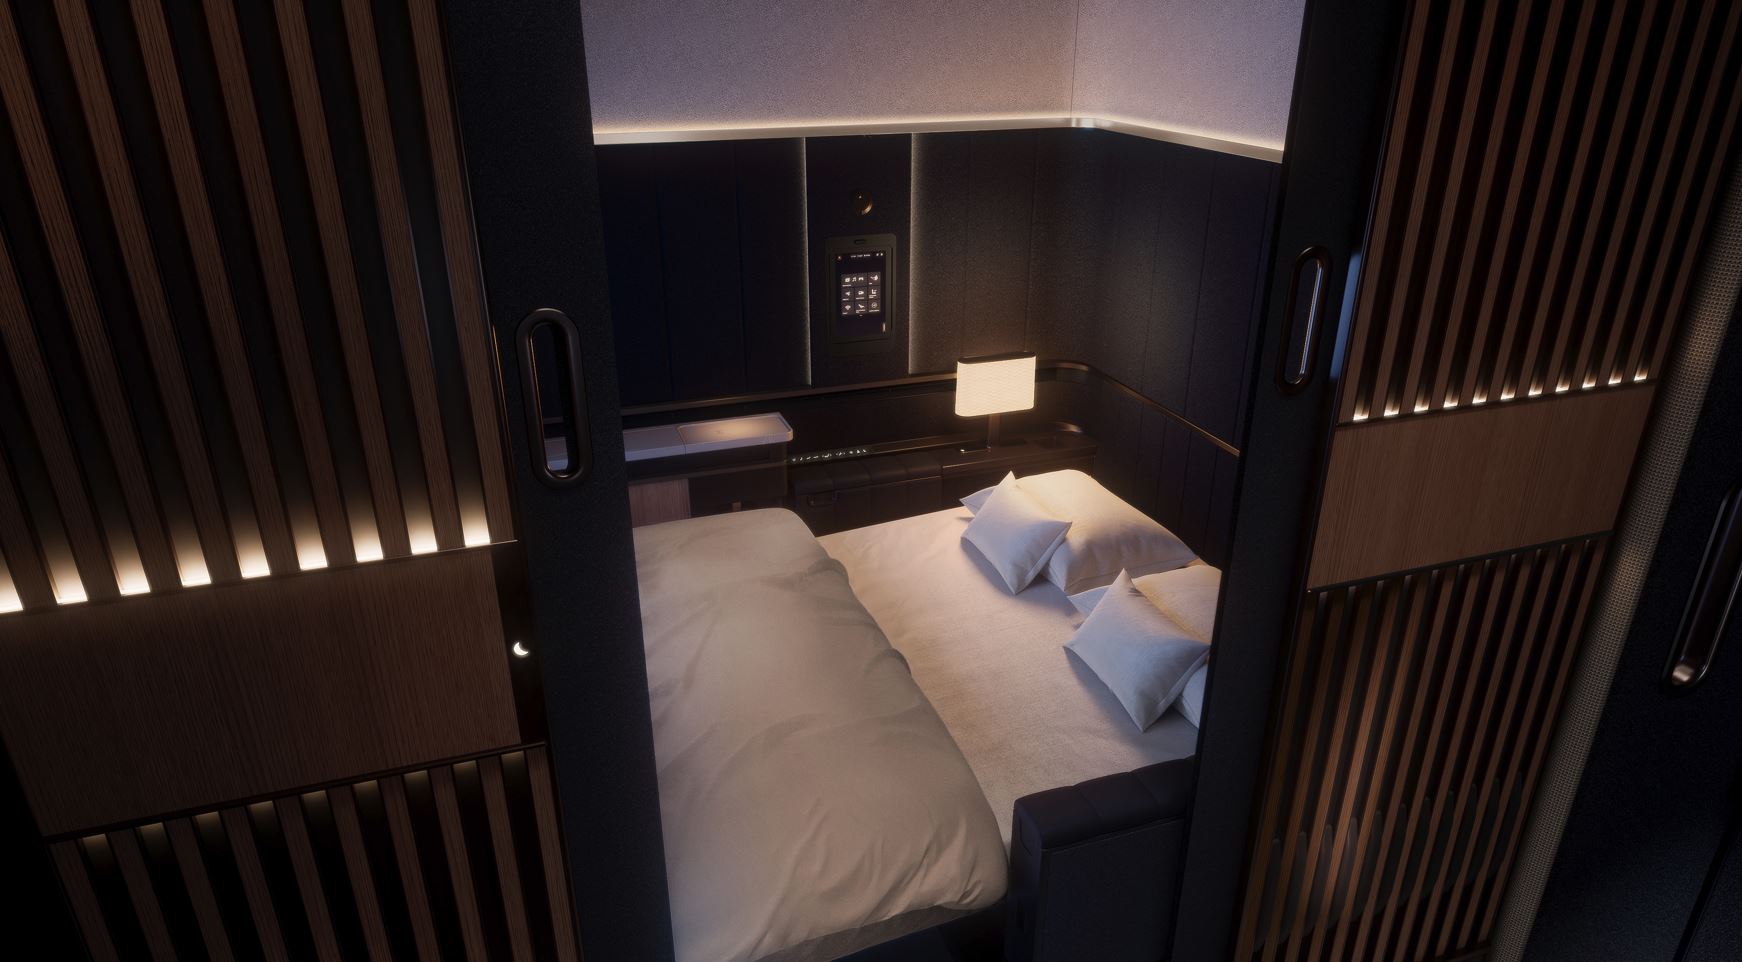 Lufthansa’s new first class suite: a private room above the clouds